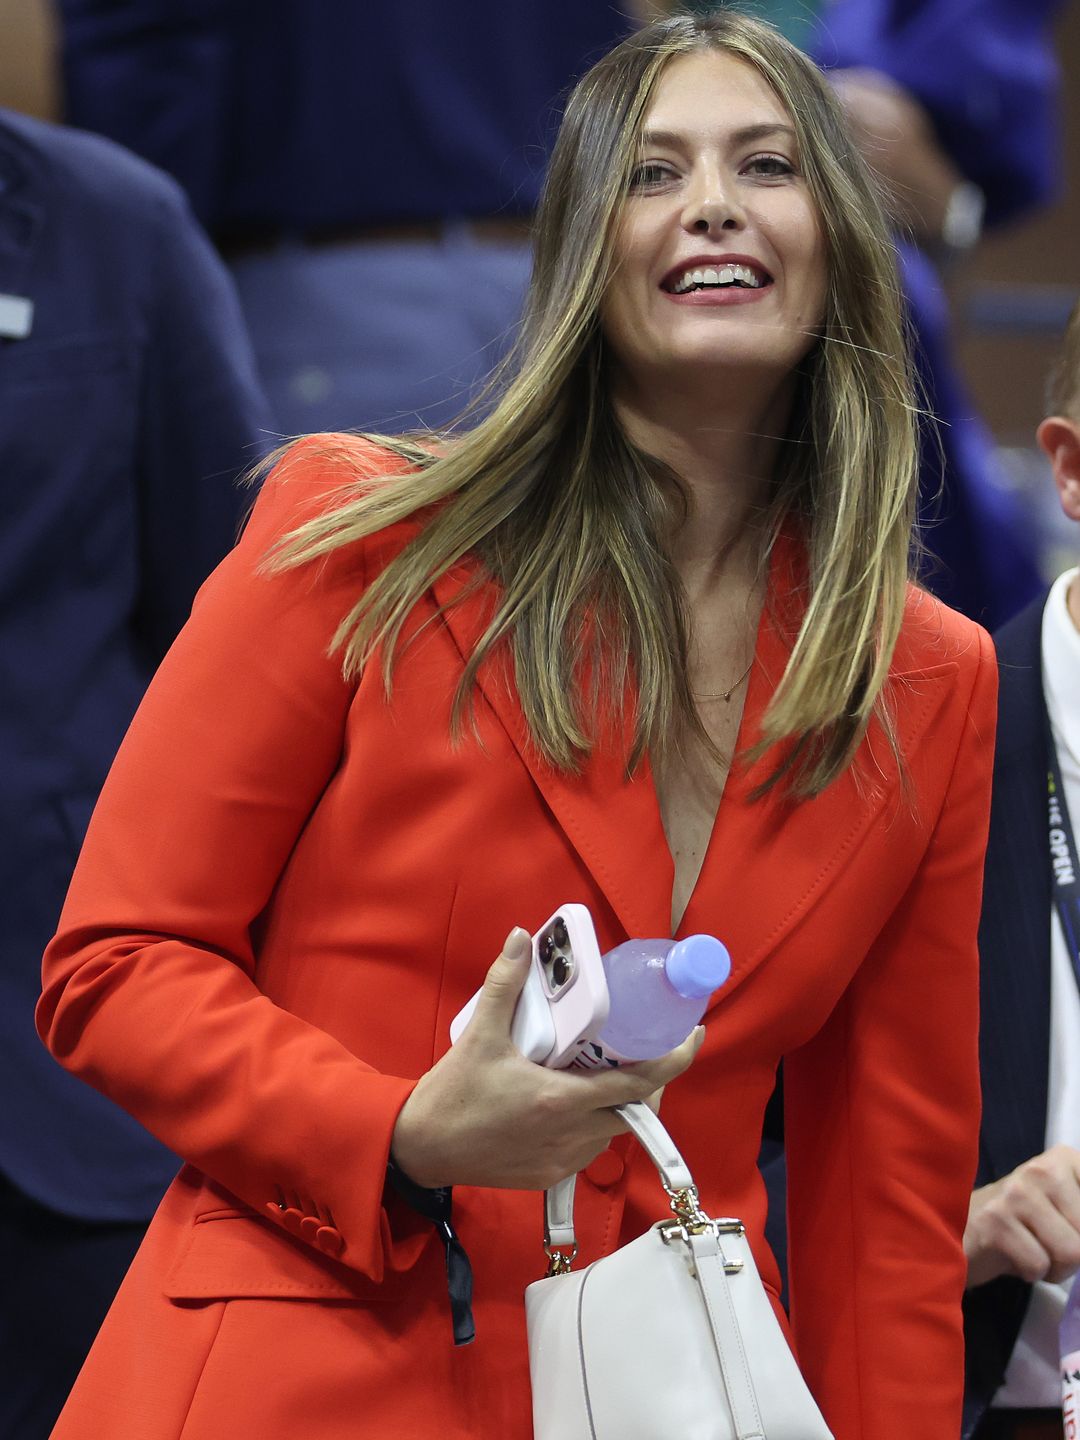 Maria Sharapova in an orange-red suit at the US Open 